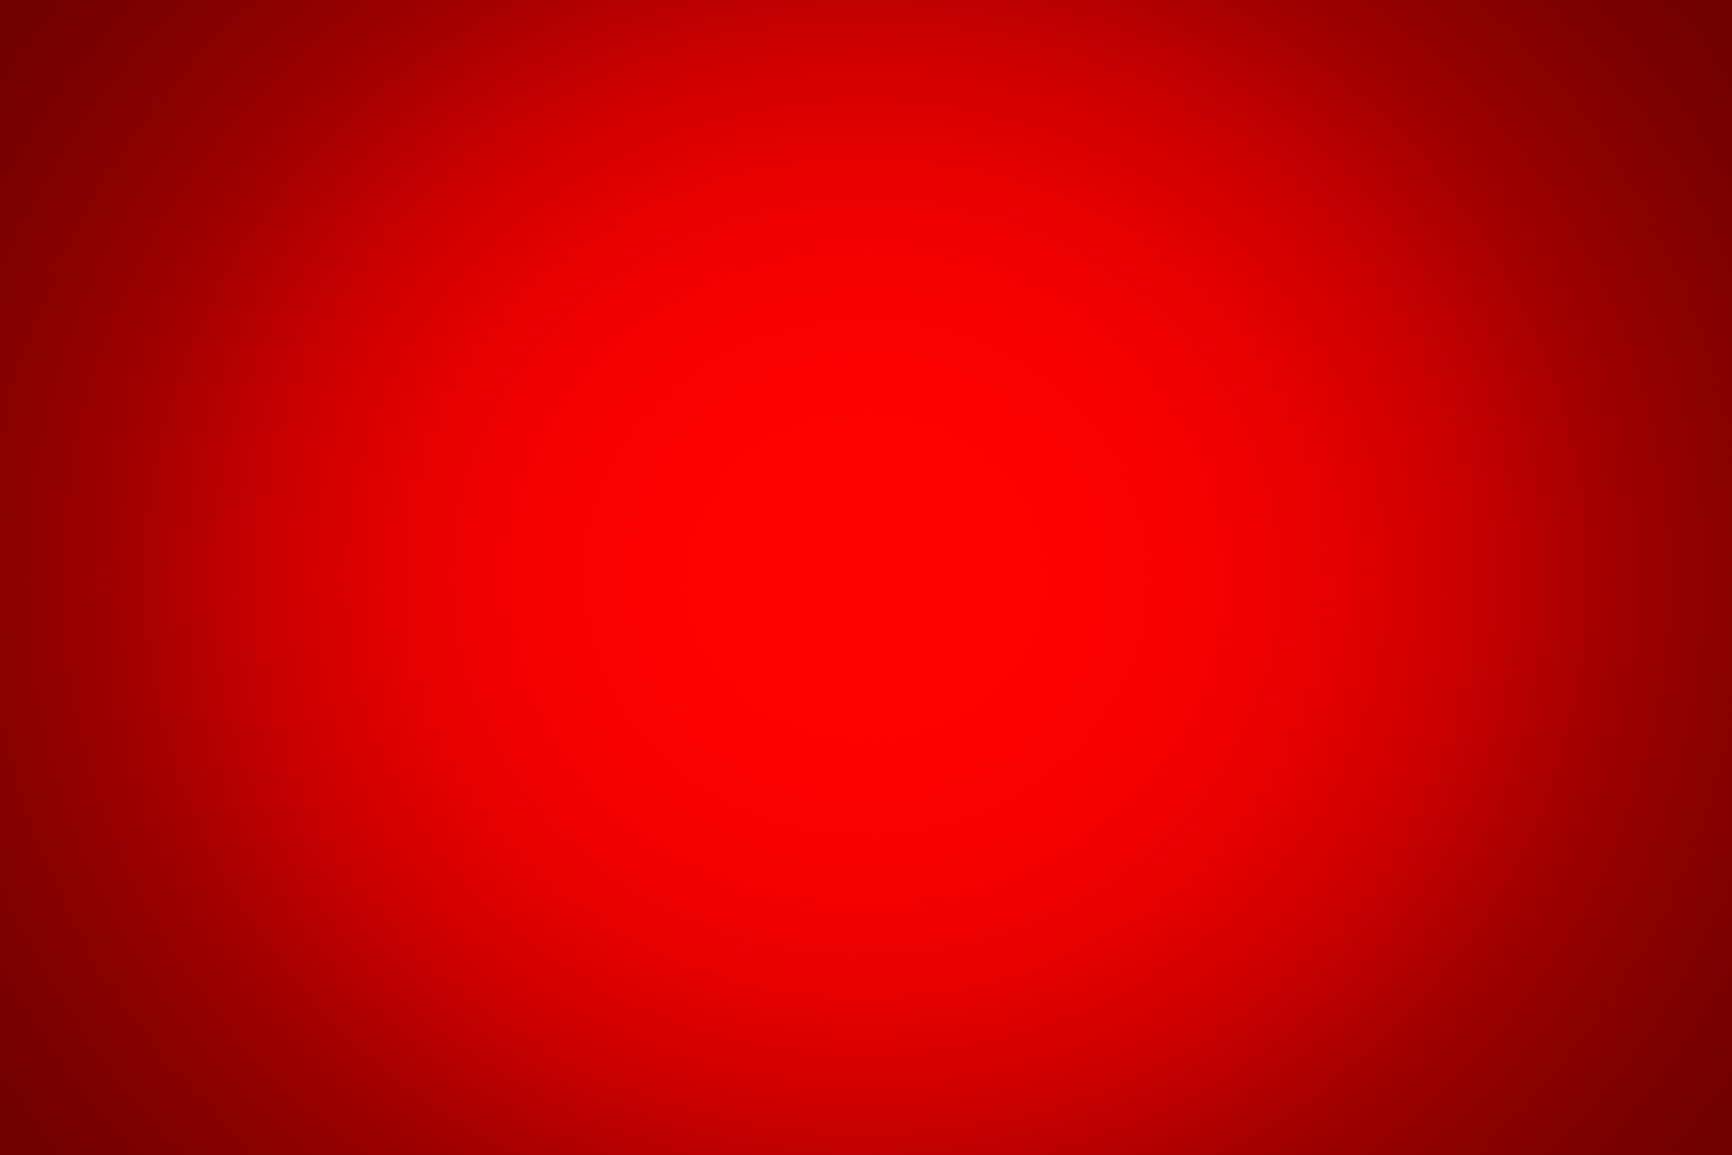 Plain Bright Red Background Image Amp Pictures Becuo